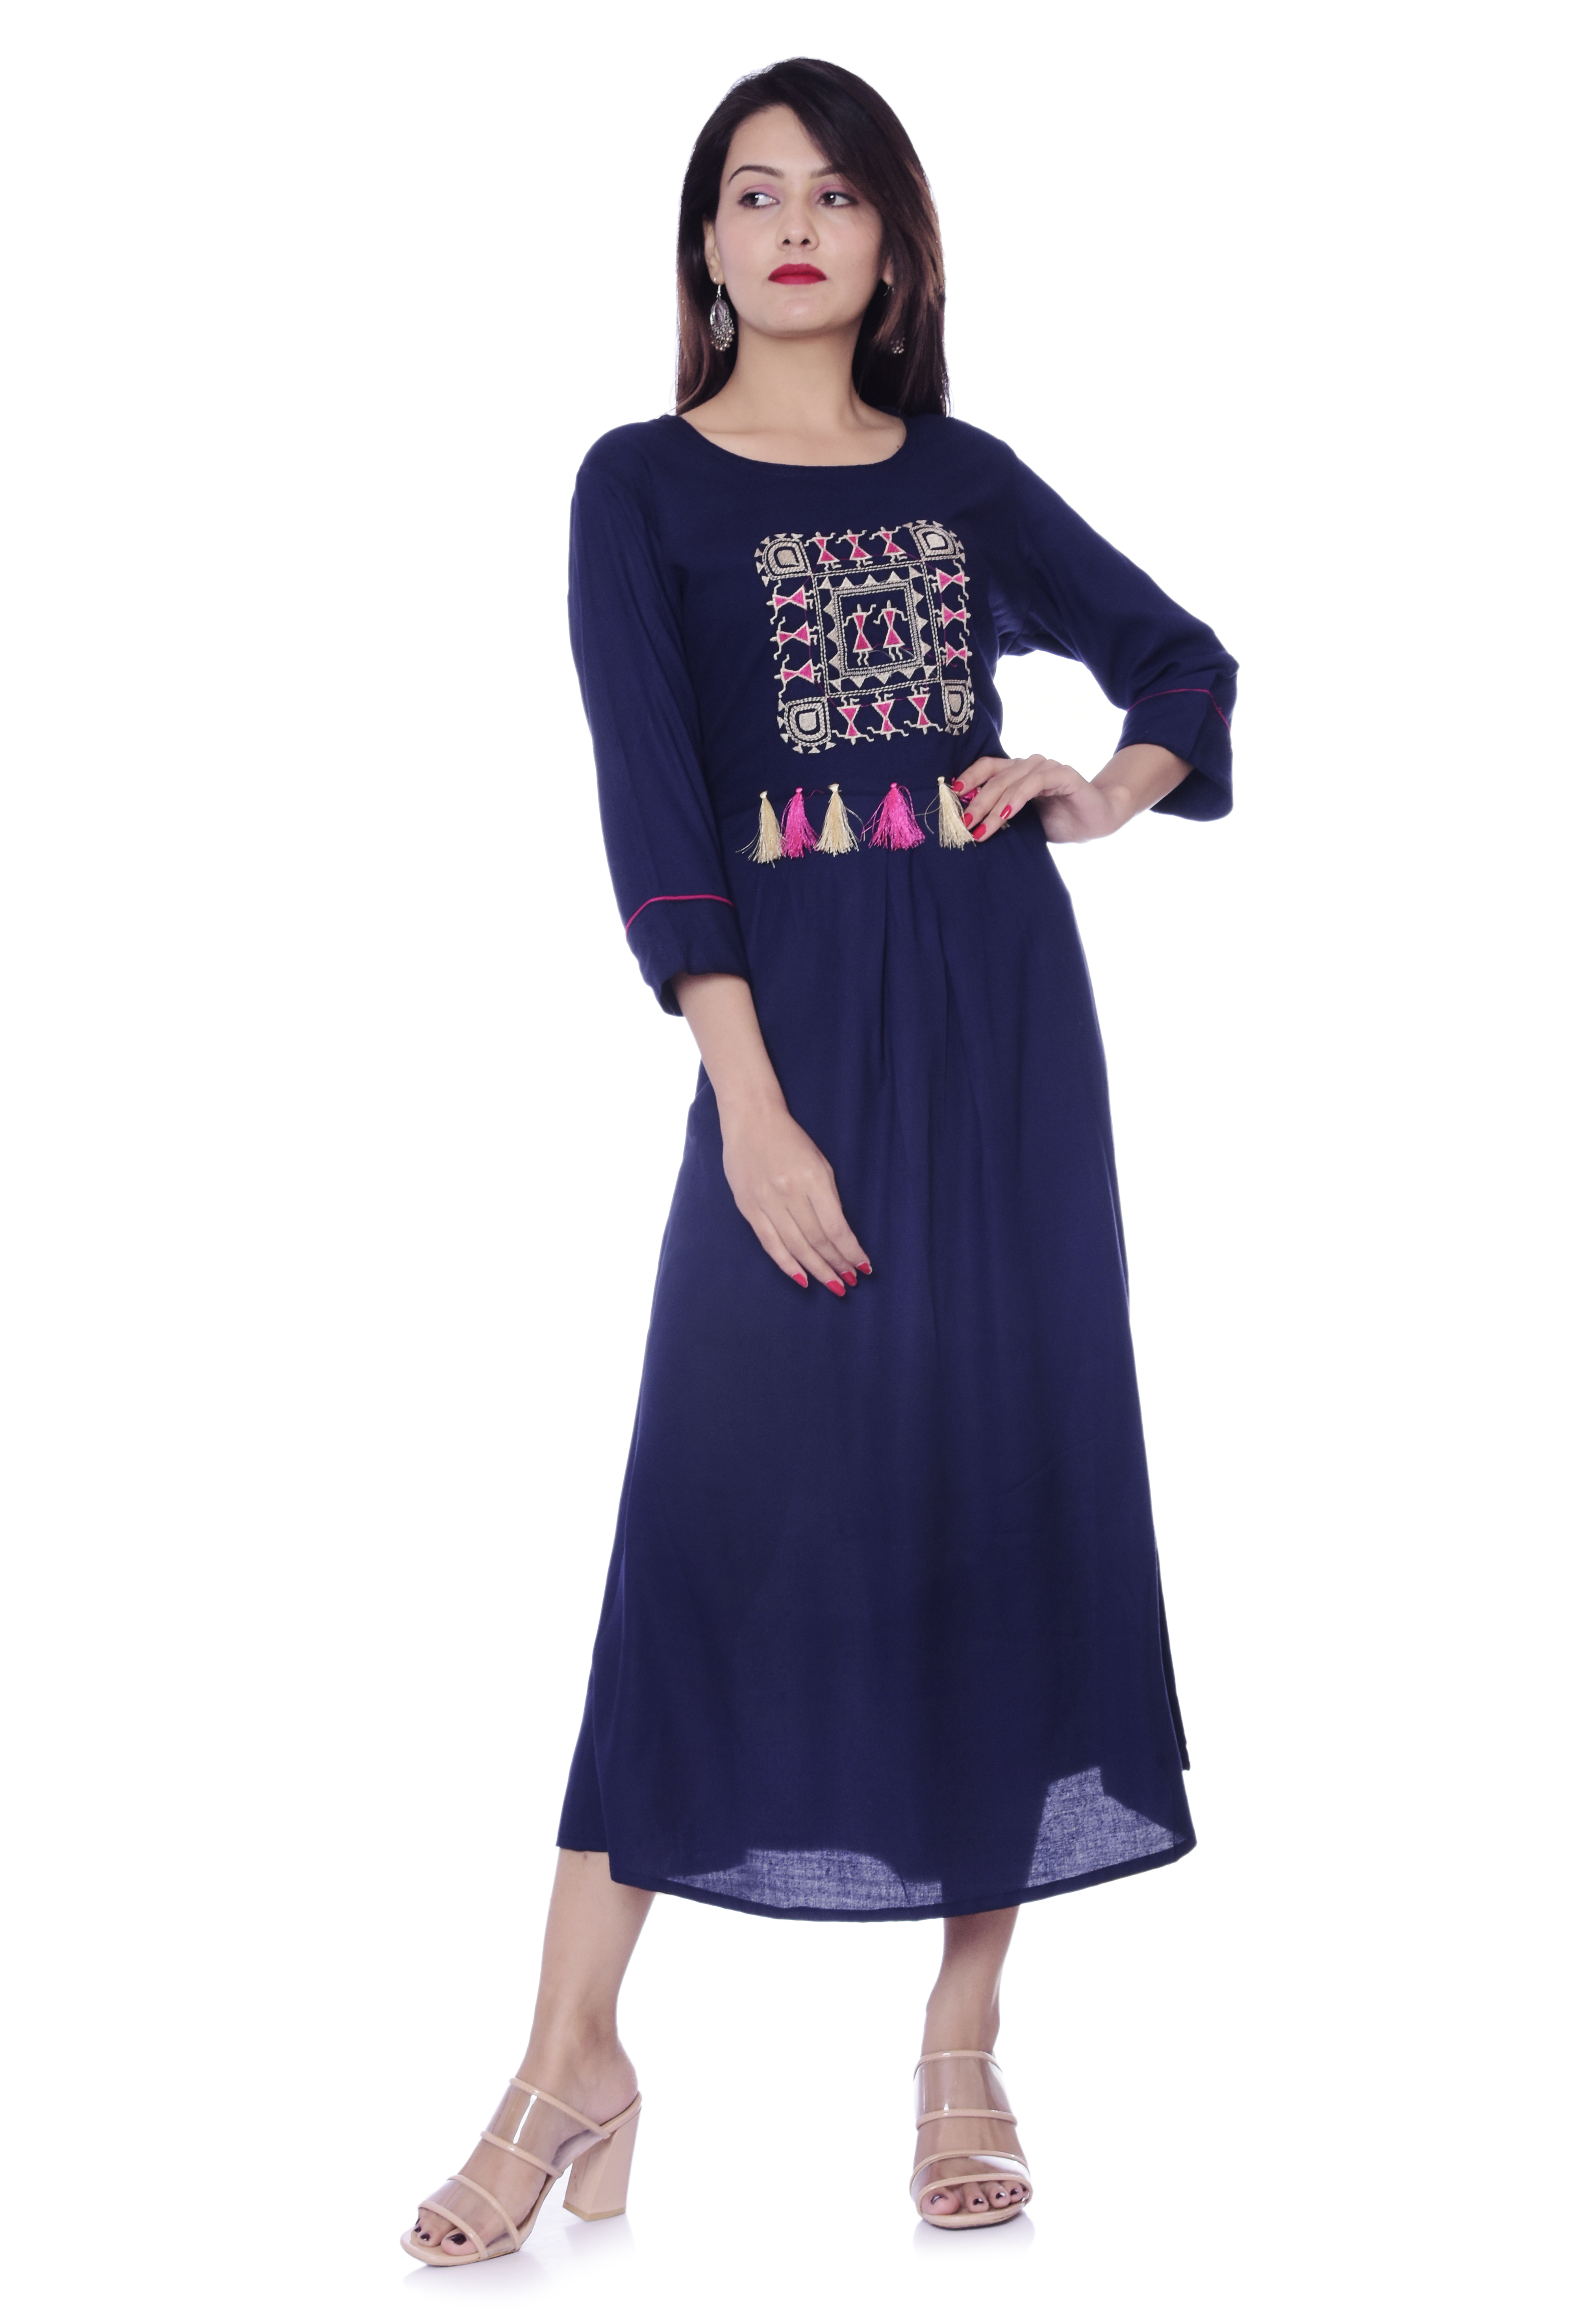 Modern Dresses Done In Traditional fabrics And Ethnic Prints | Threads -  WeRIndia | Casual frocks, Ikat dress, Indian fashion dresses